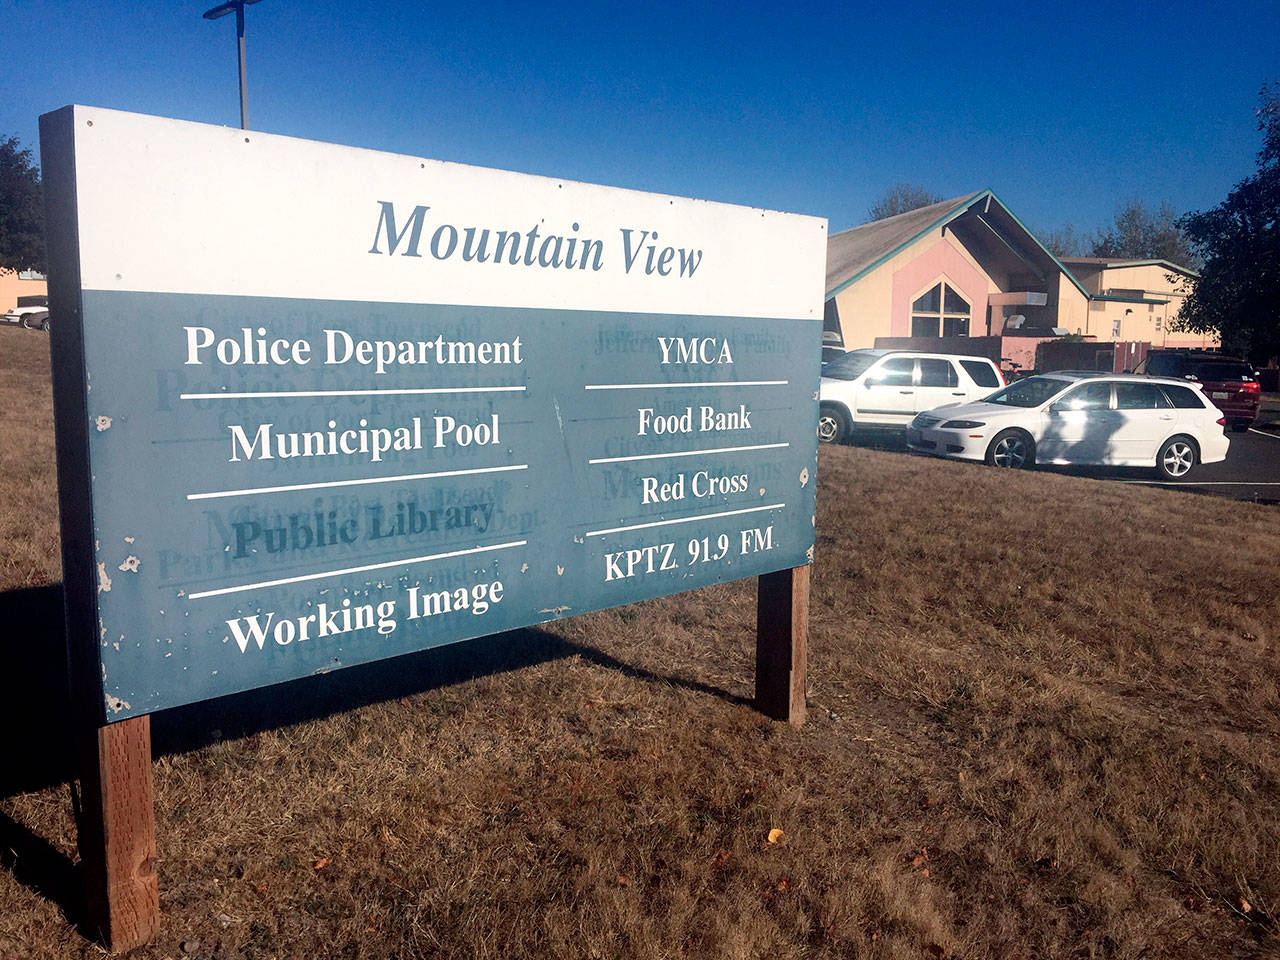 Workshops planned for Thursday and Friday at Mountain View Commons will help gather community input on creating a community recovery center with help from the EPA. (Cydney McFarland/Peninsula Daily News)